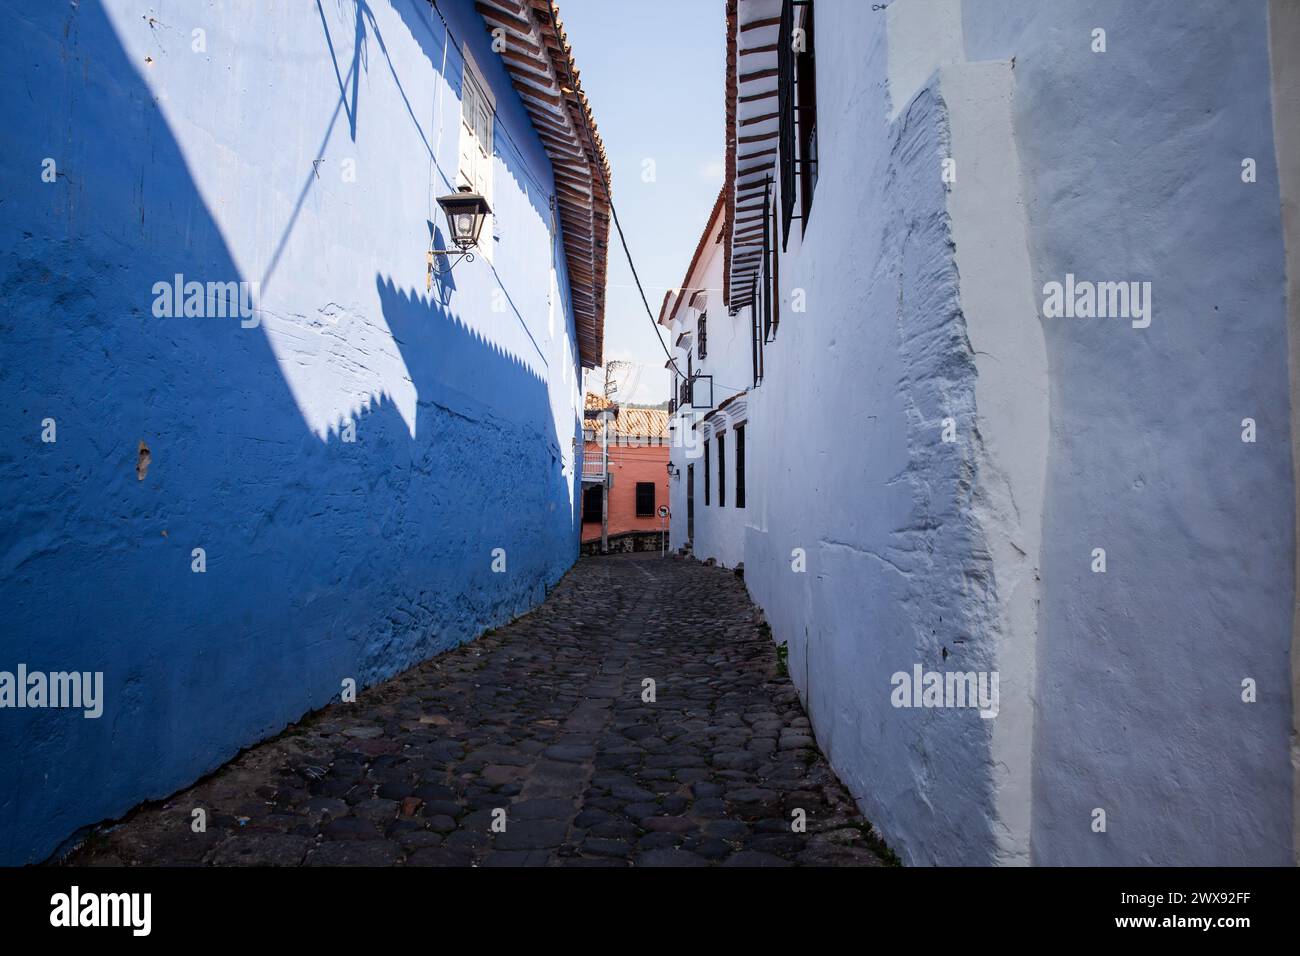 Famous historical street of traps located in the historic center of the heritage town of Honda in the department of Tolima in Colombia Stock Photo